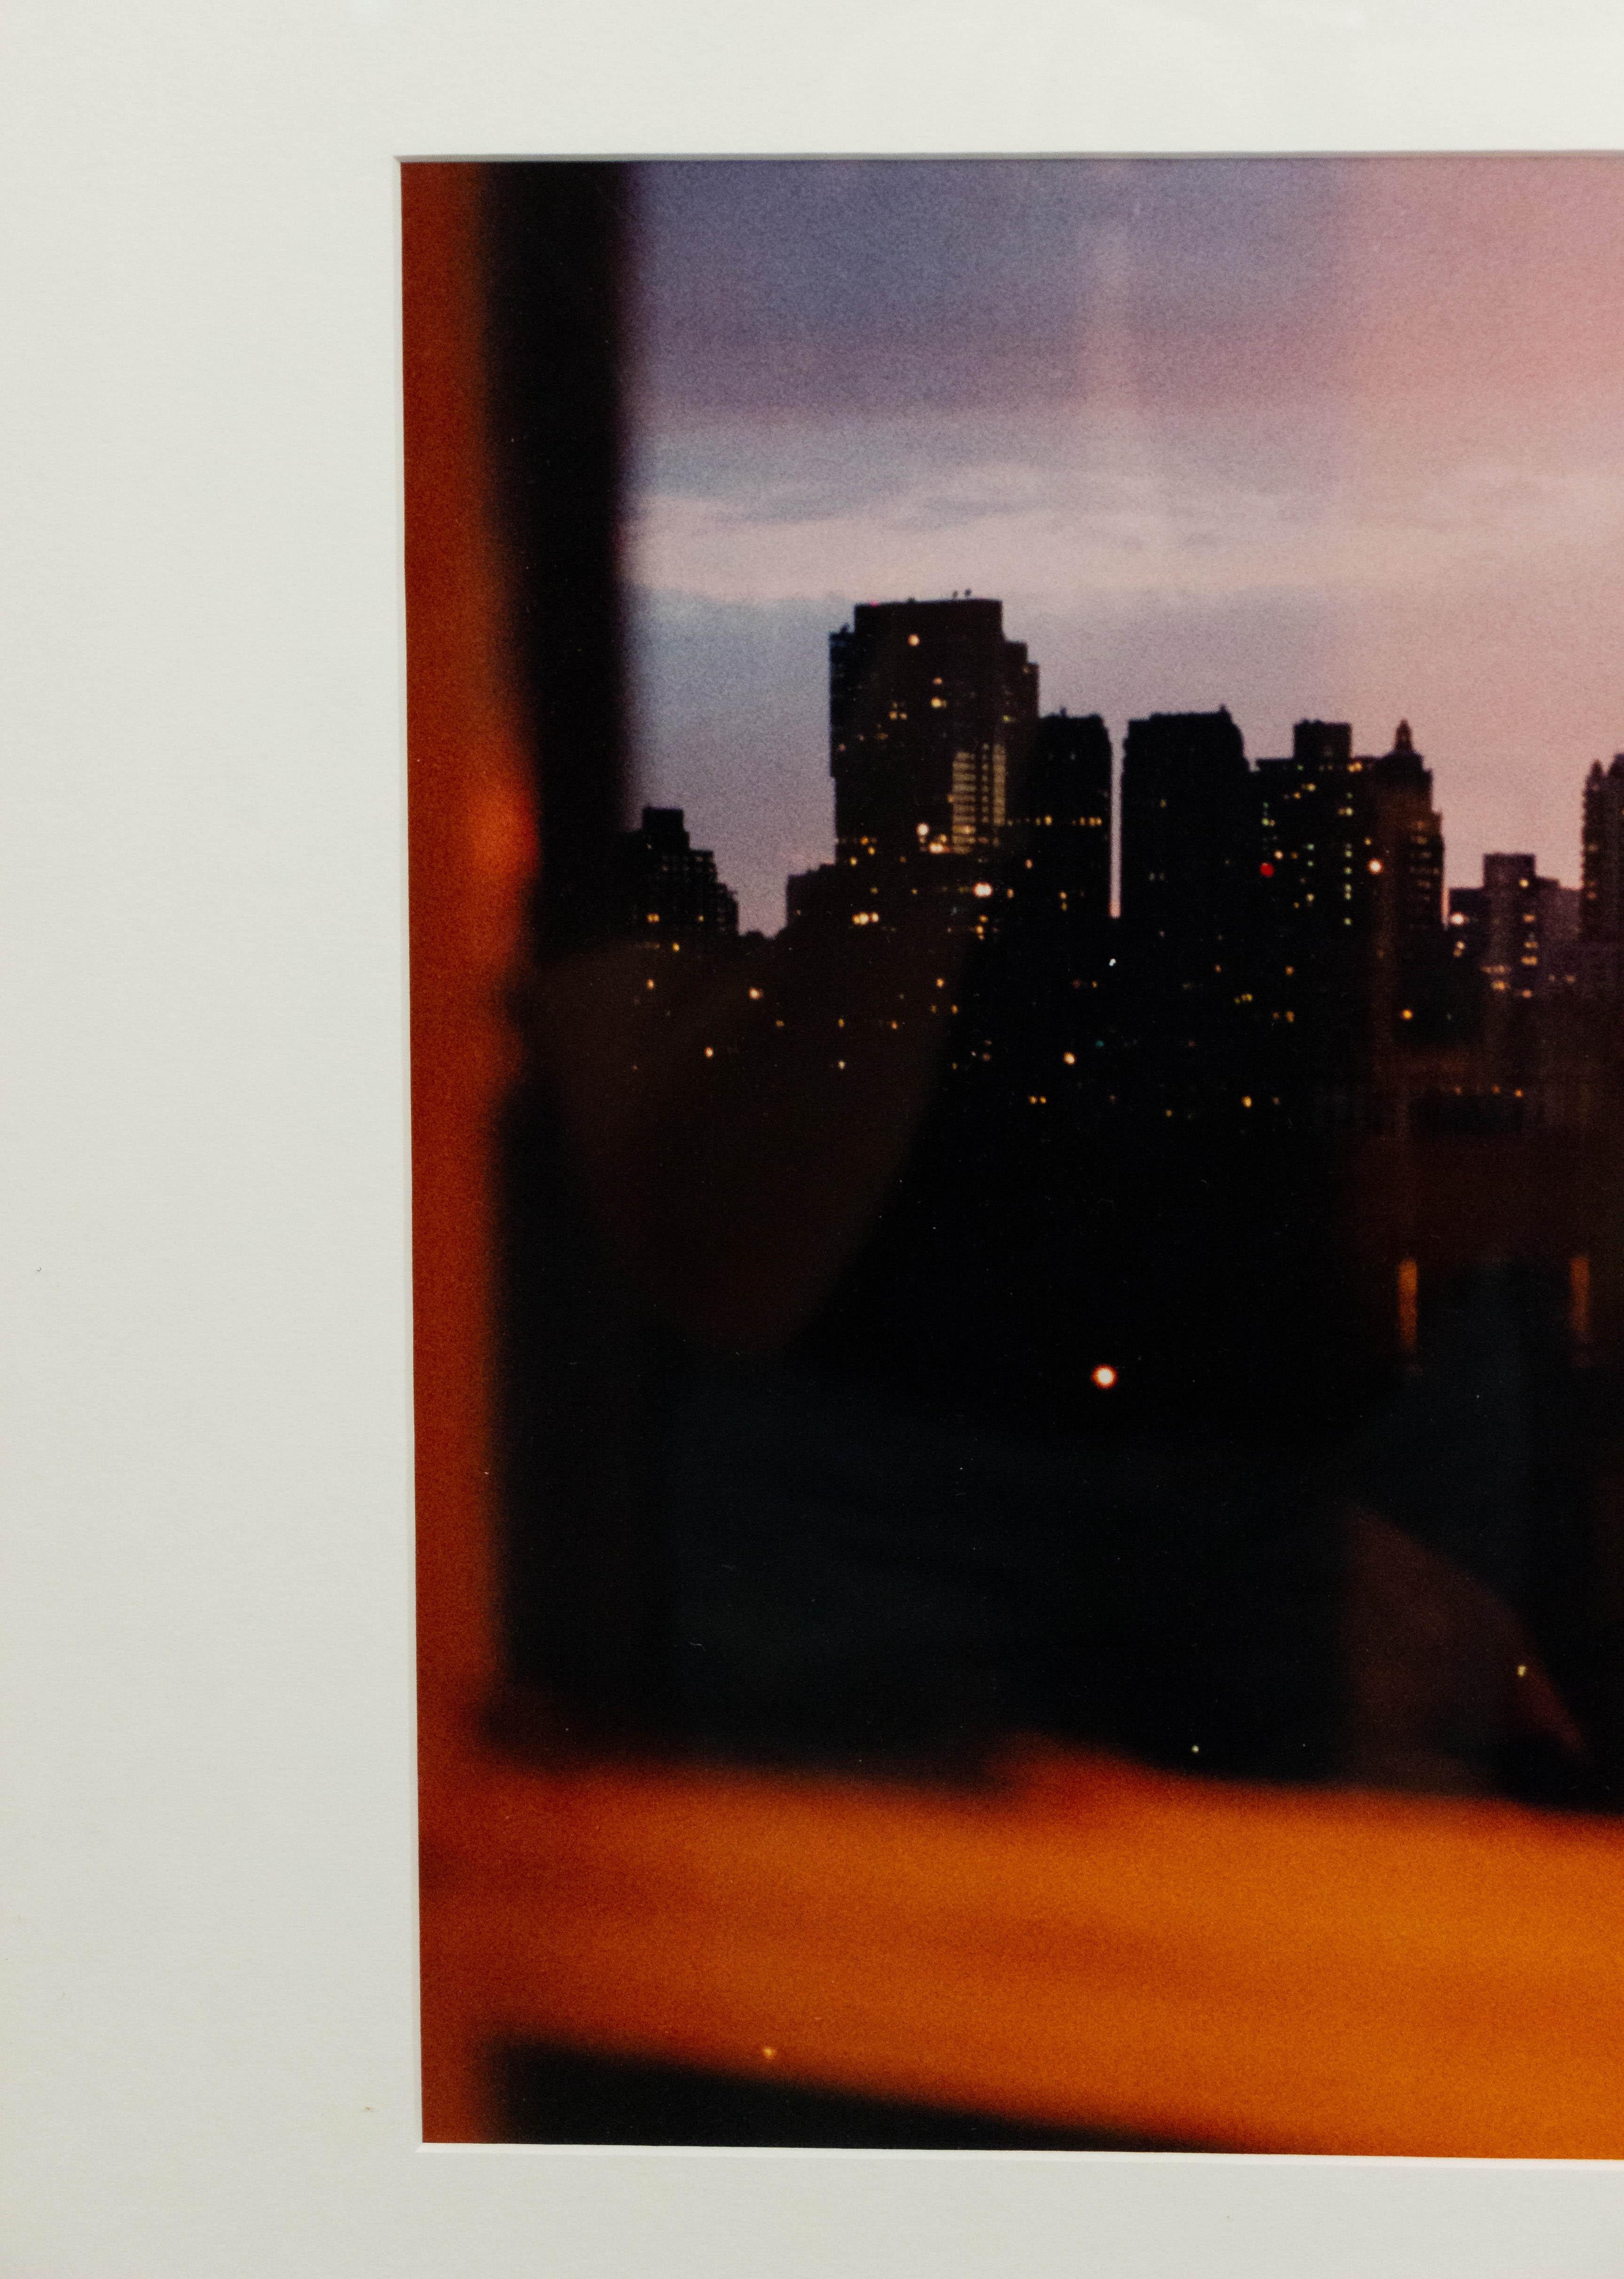 American Color Photograph of a Cityscape in a Window